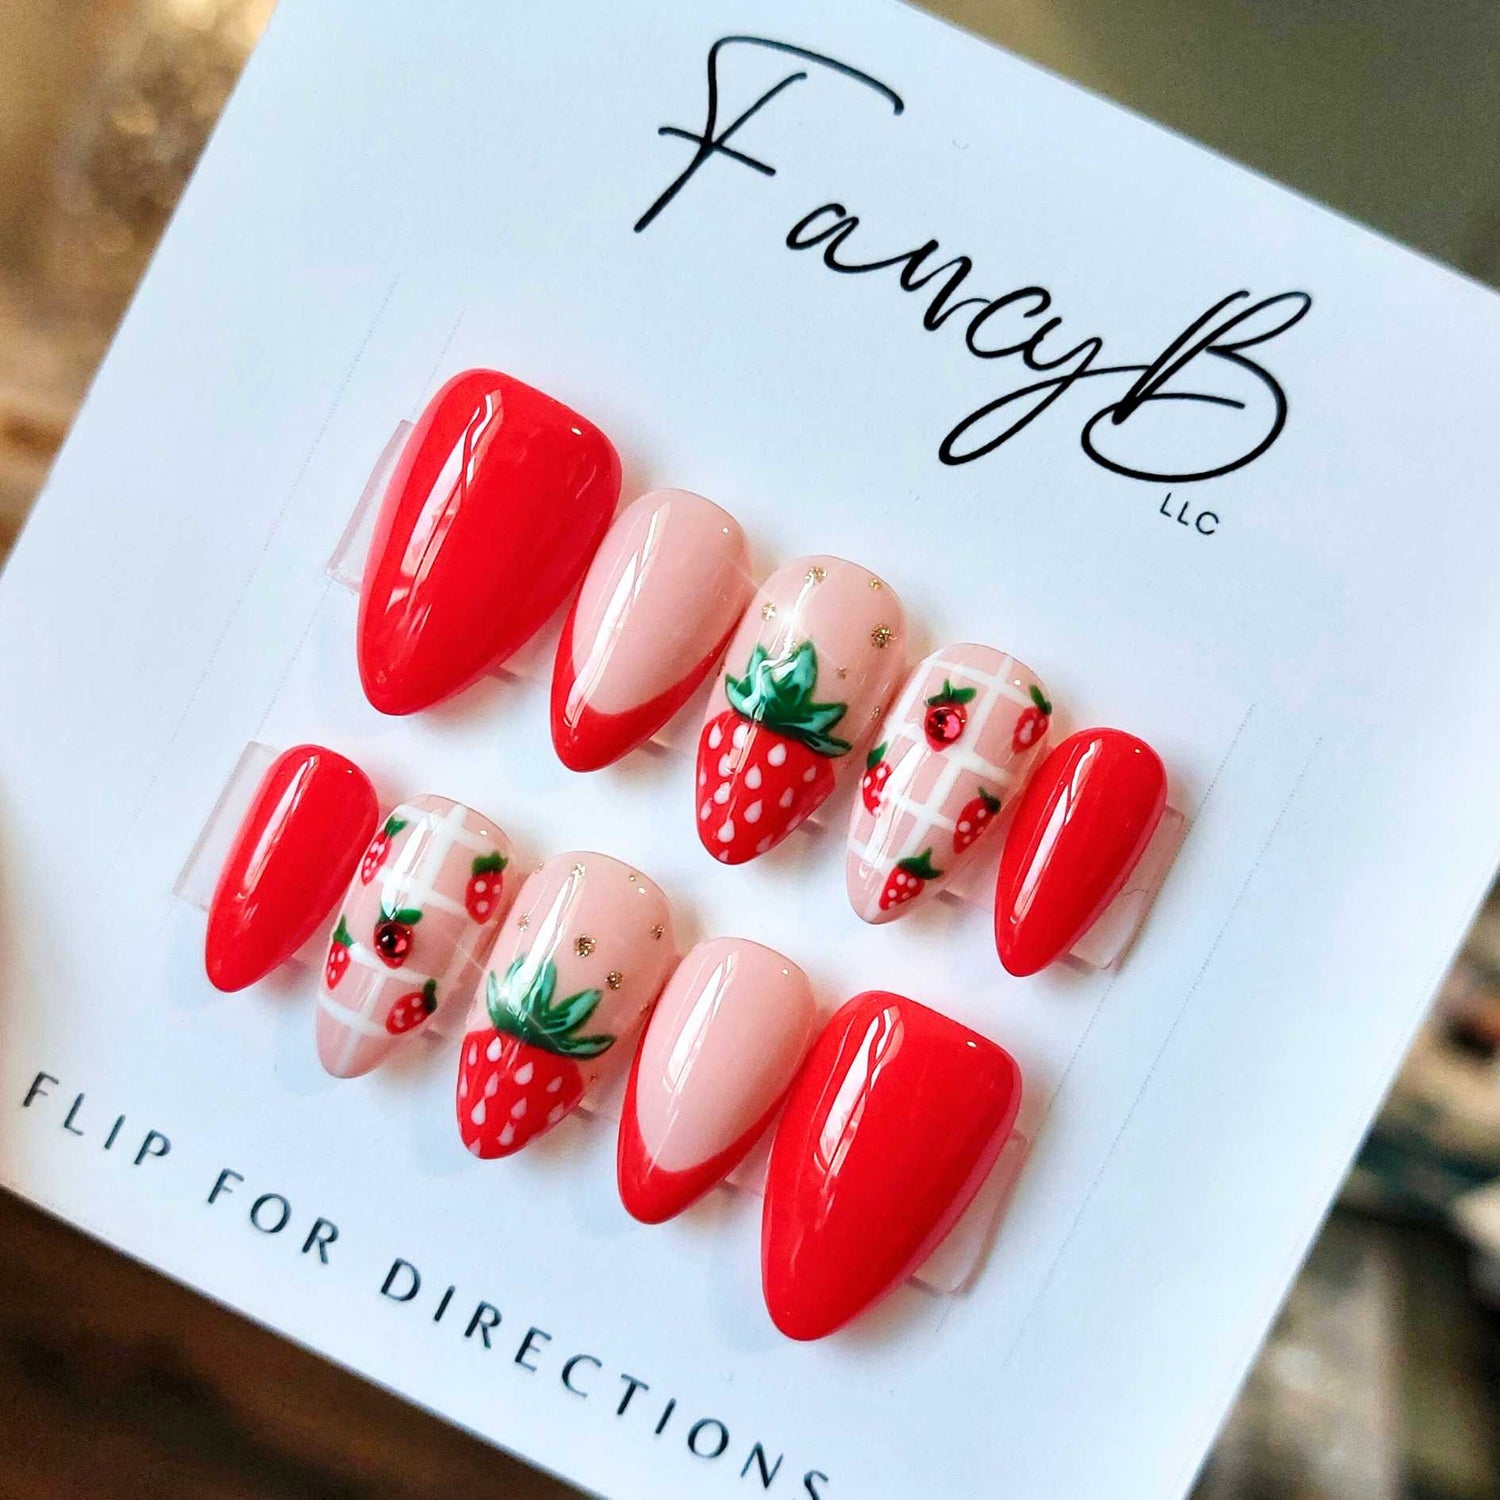 custom strawberry nails, summery fruit nails with strawberries and bright red french accents, gold glitter, and short almond shape from FancyB handmade nails.